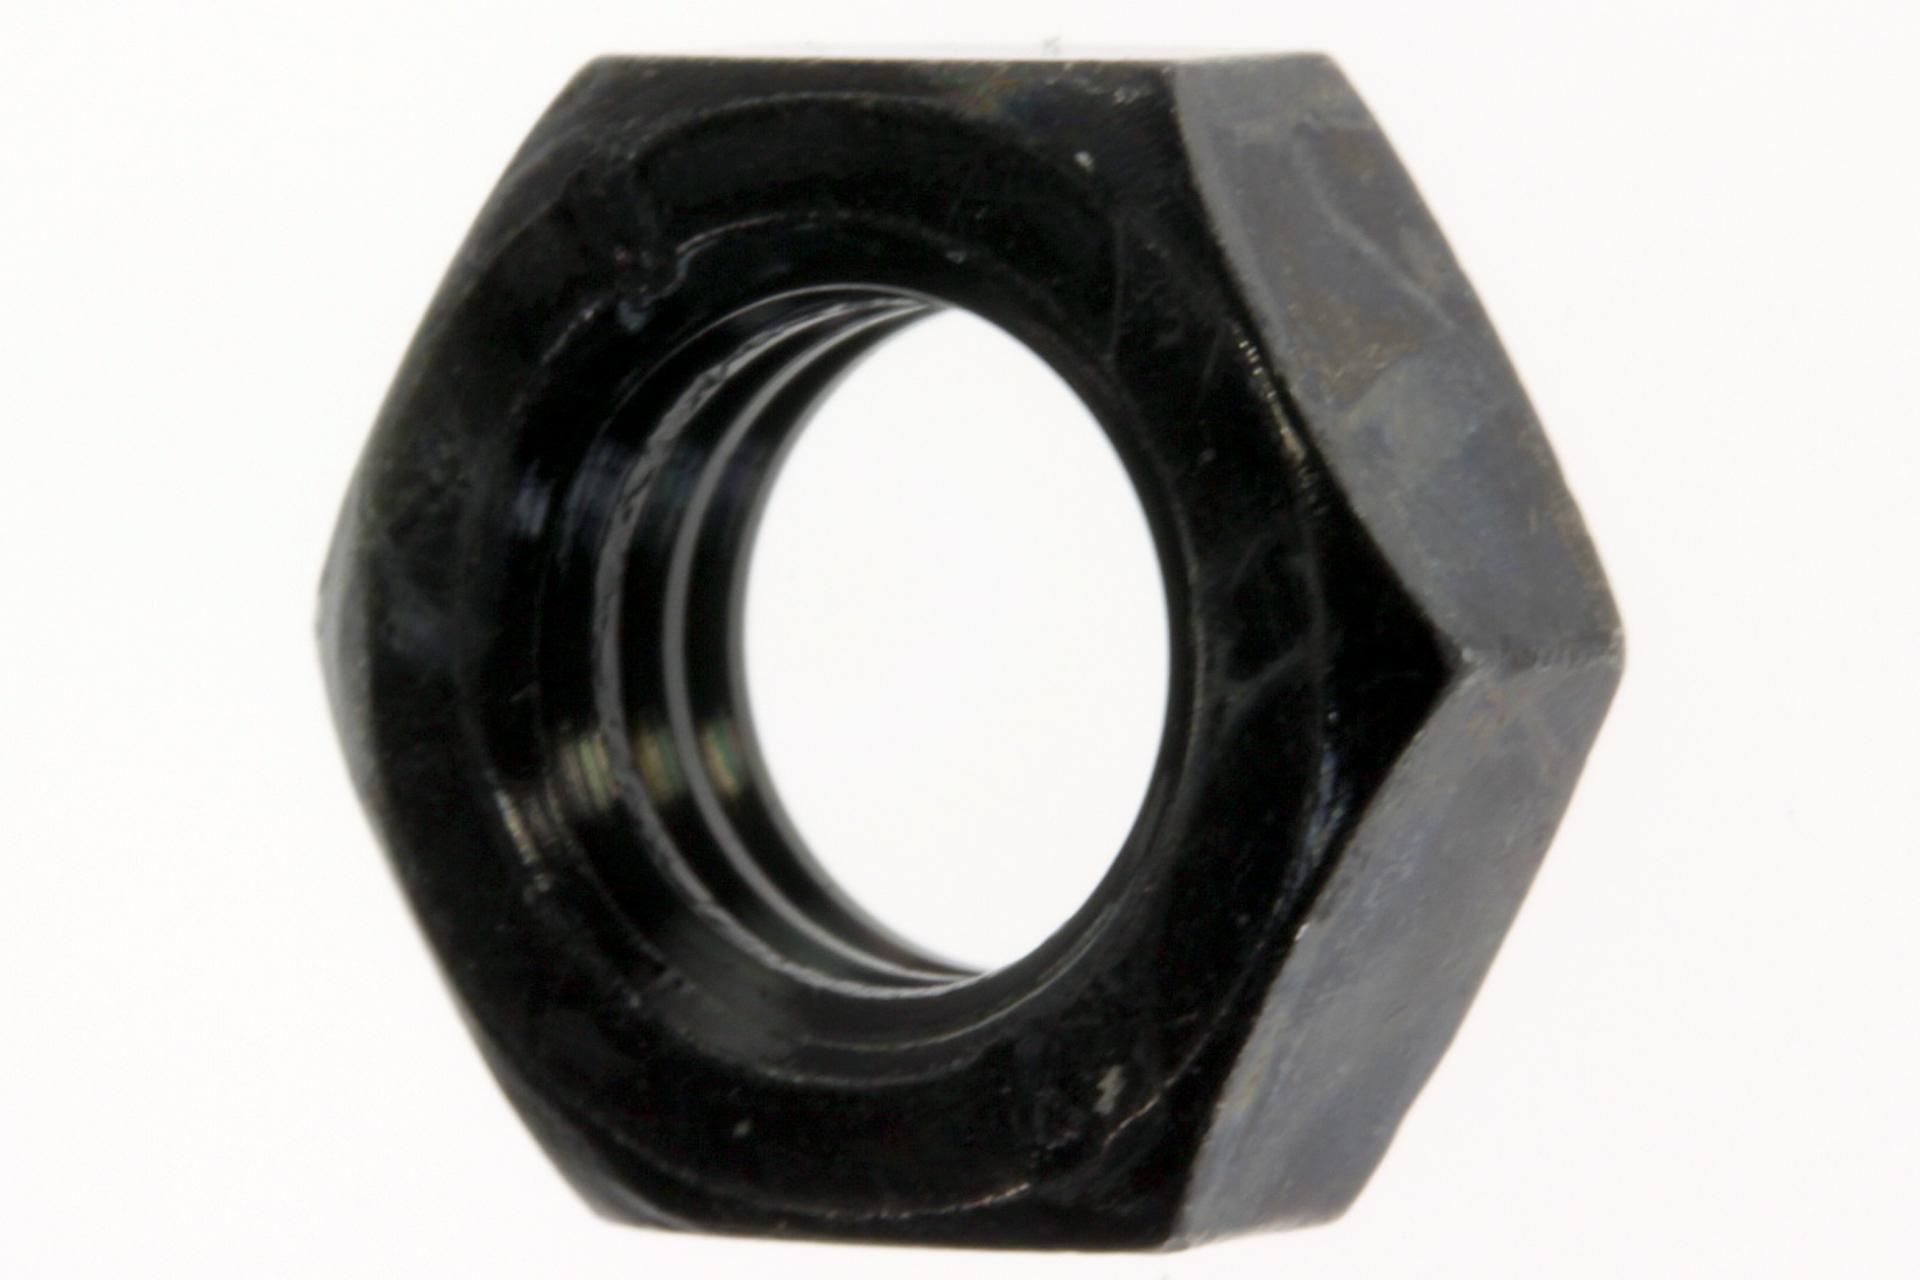 4SS-27218-00-00 Superseded by 95317-08700-00 - NUT,HEX SMALL